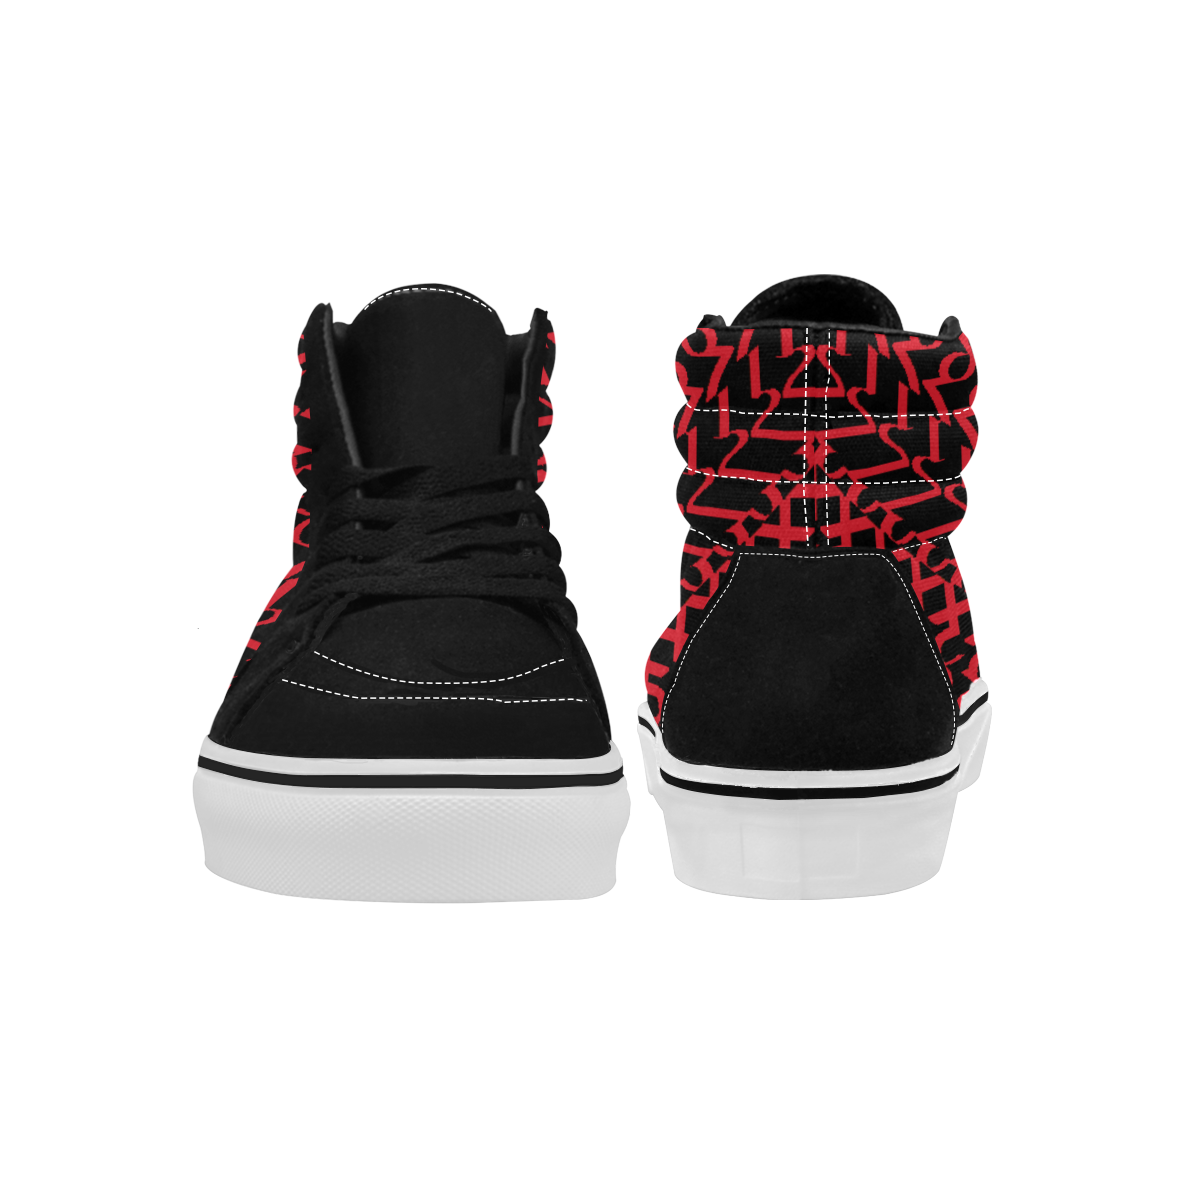 NUMBERS Collection 1234567 Red/Black Men's High Top Skateboarding Shoes (Model E001-1)